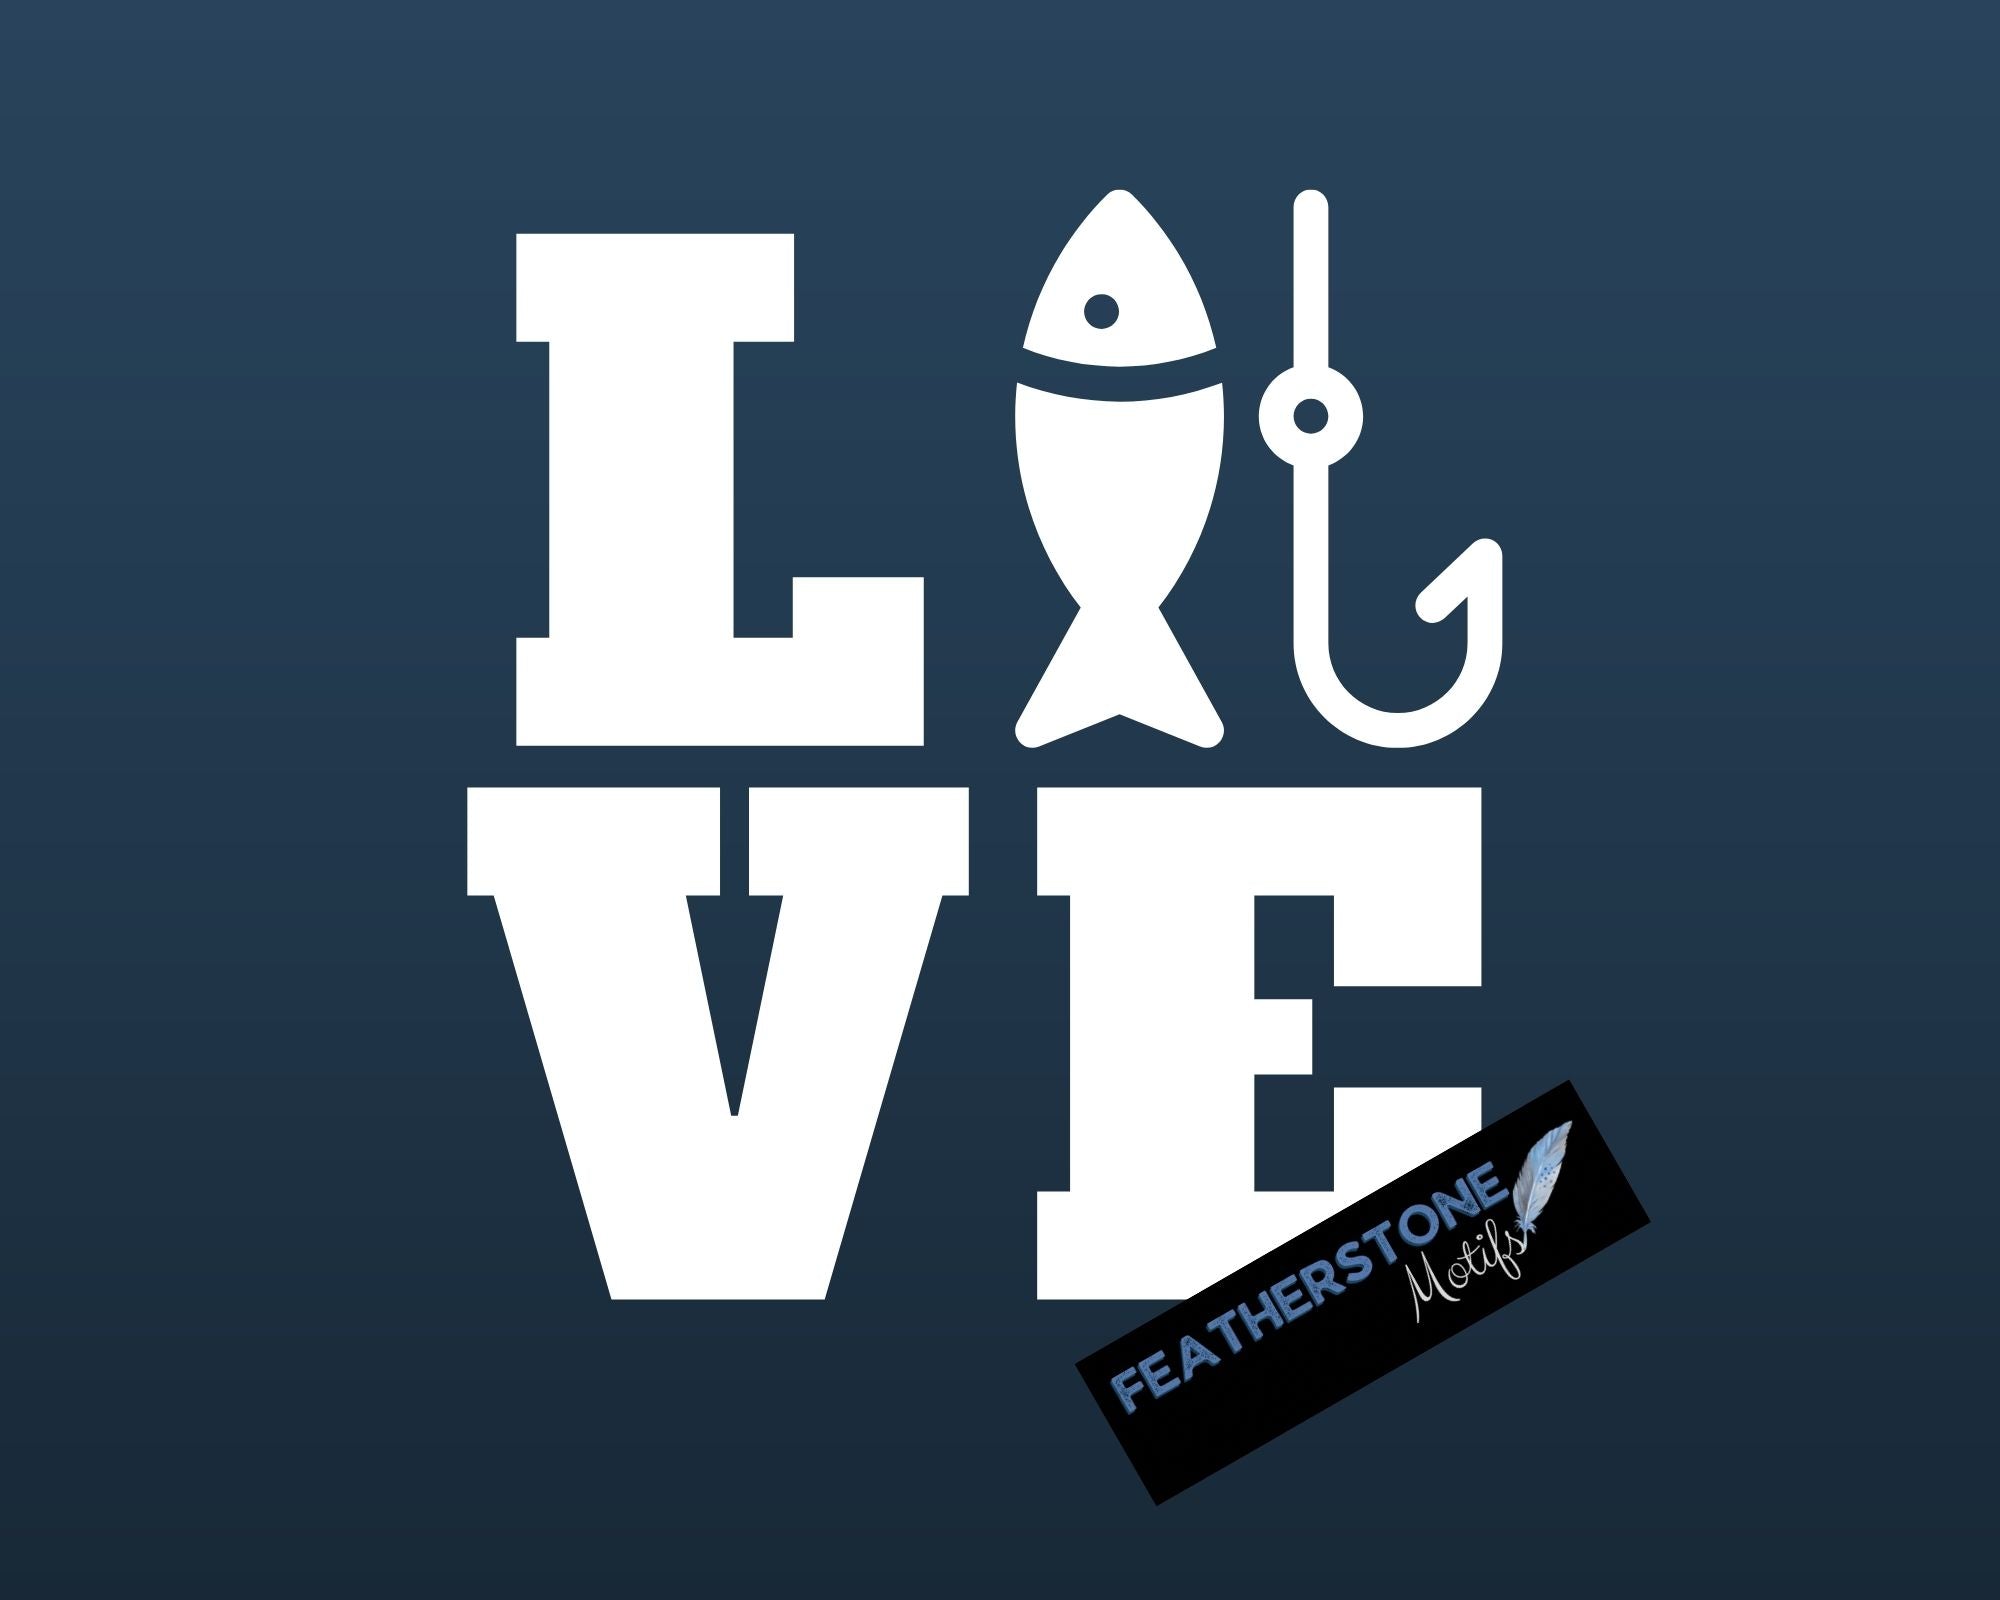 Love the fishing? Then show it with this fishing love square vinyl decal! Available in 4 sizes and 10 colors, these vinyl decals make great gifts for everyone. This image shows the Fishing Love Square vinyl decal on a blue background.